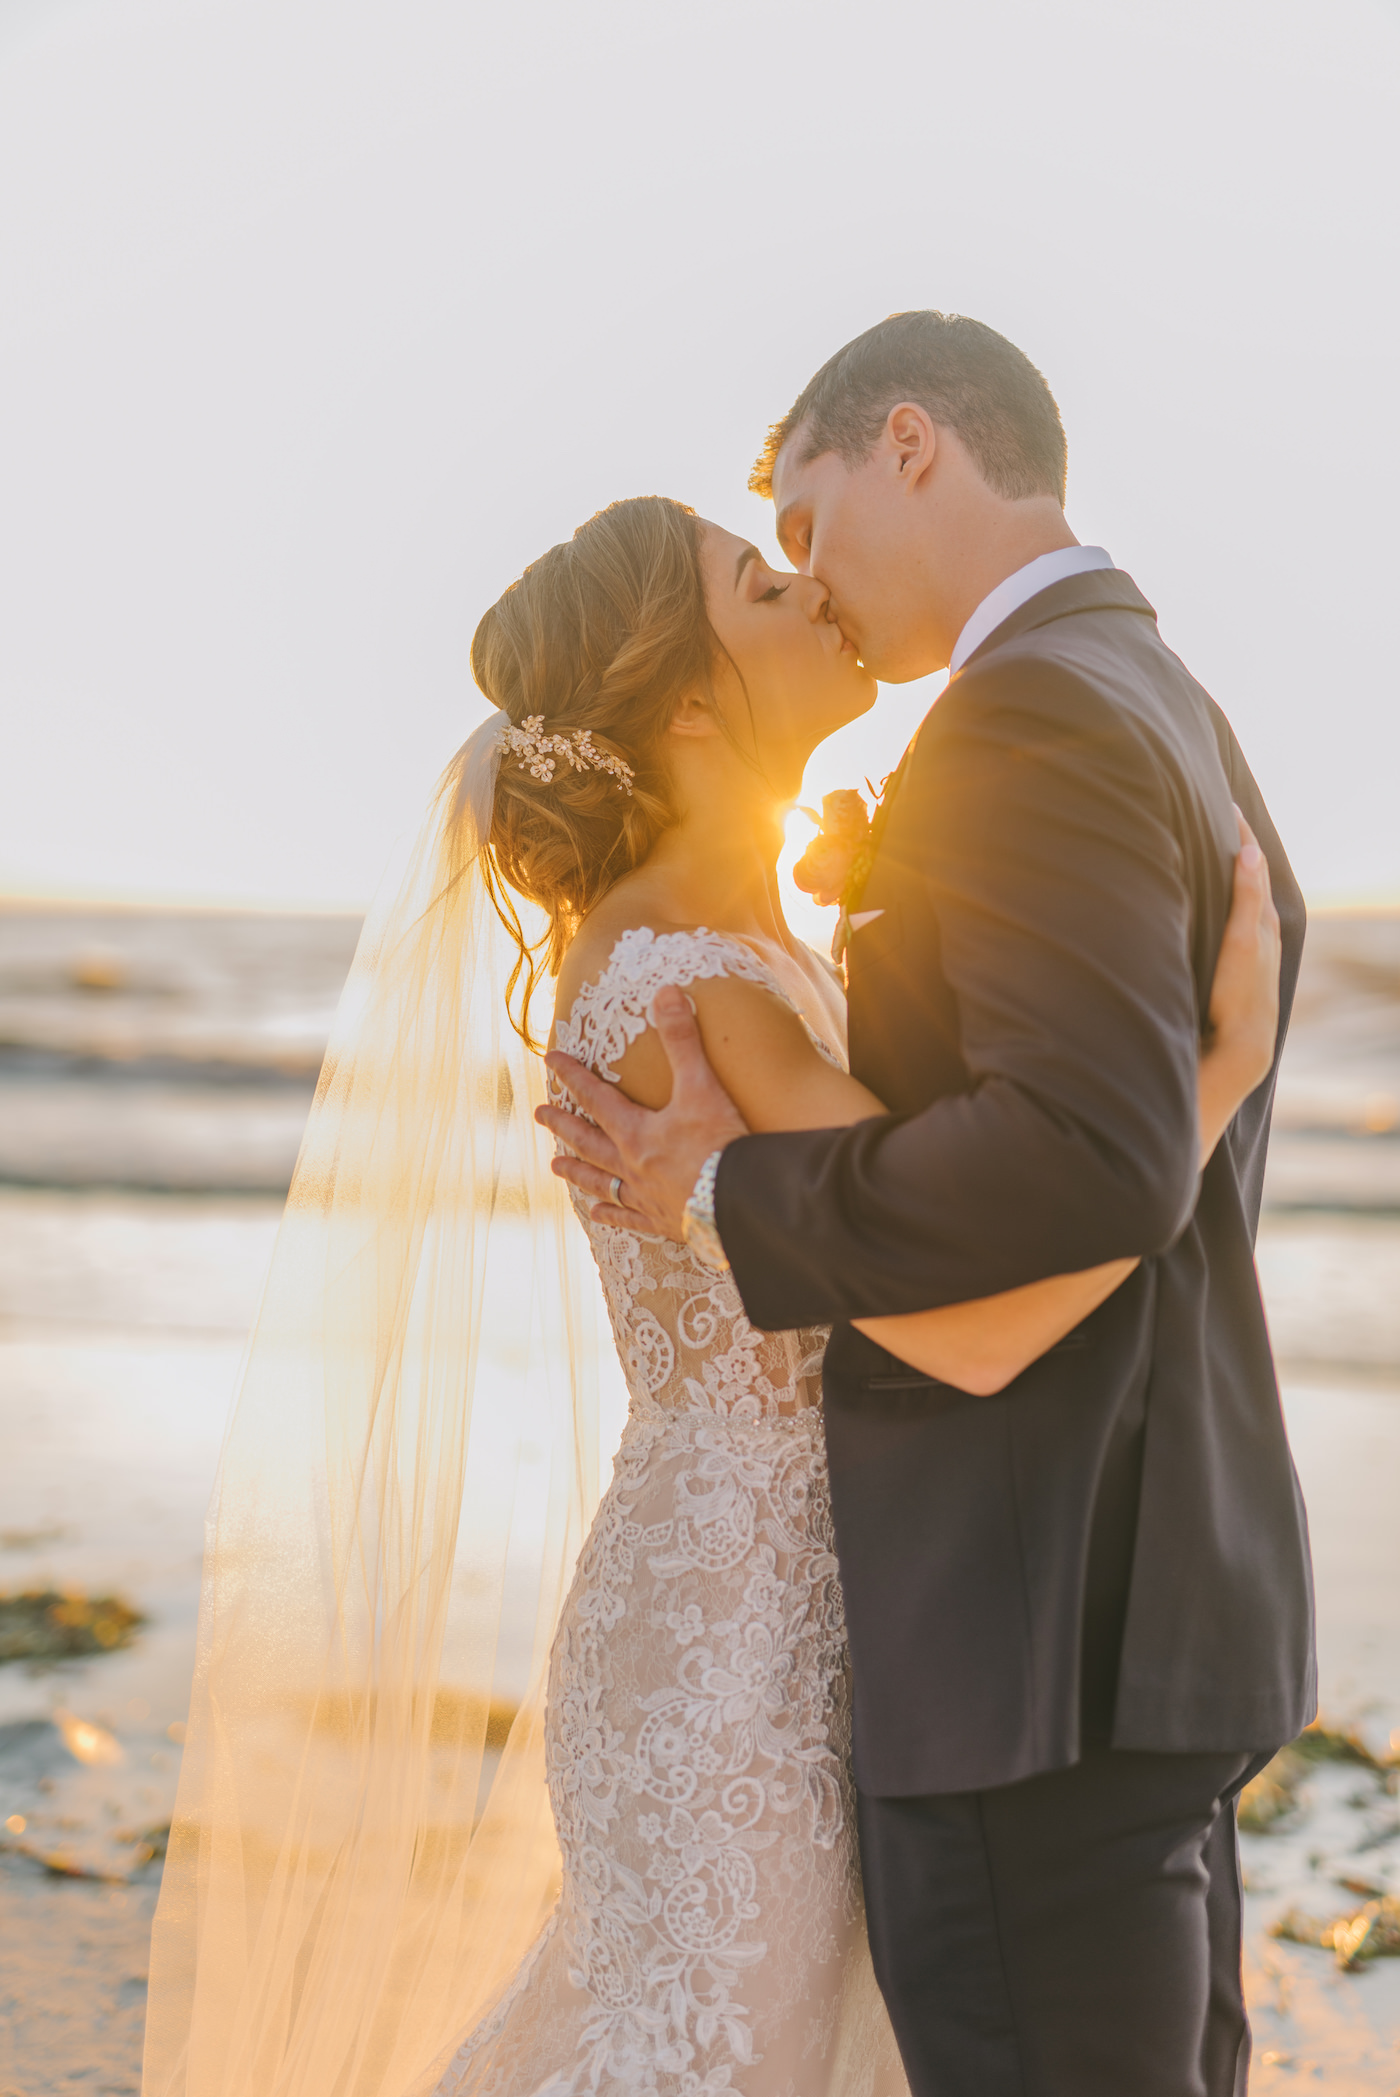 Bride and Groom Outdoor Clearwater Beach Wedding Sunset Portrait | Tampa Bay Wedding Photographer Kera Photography